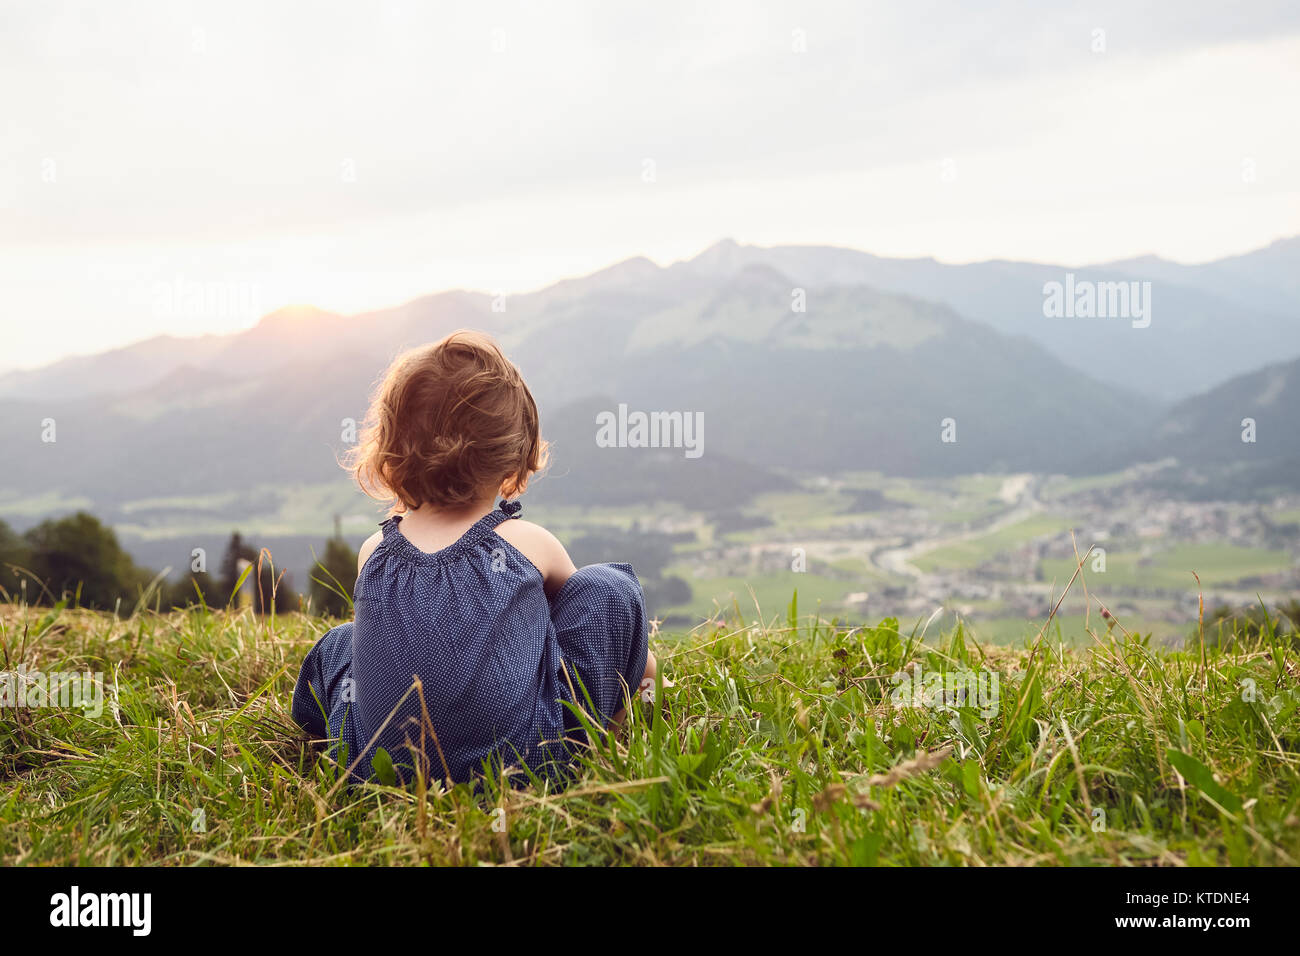 Austria, Tyrol, back view of little girl sitting on Alpine meadow looking at view Stock Photo